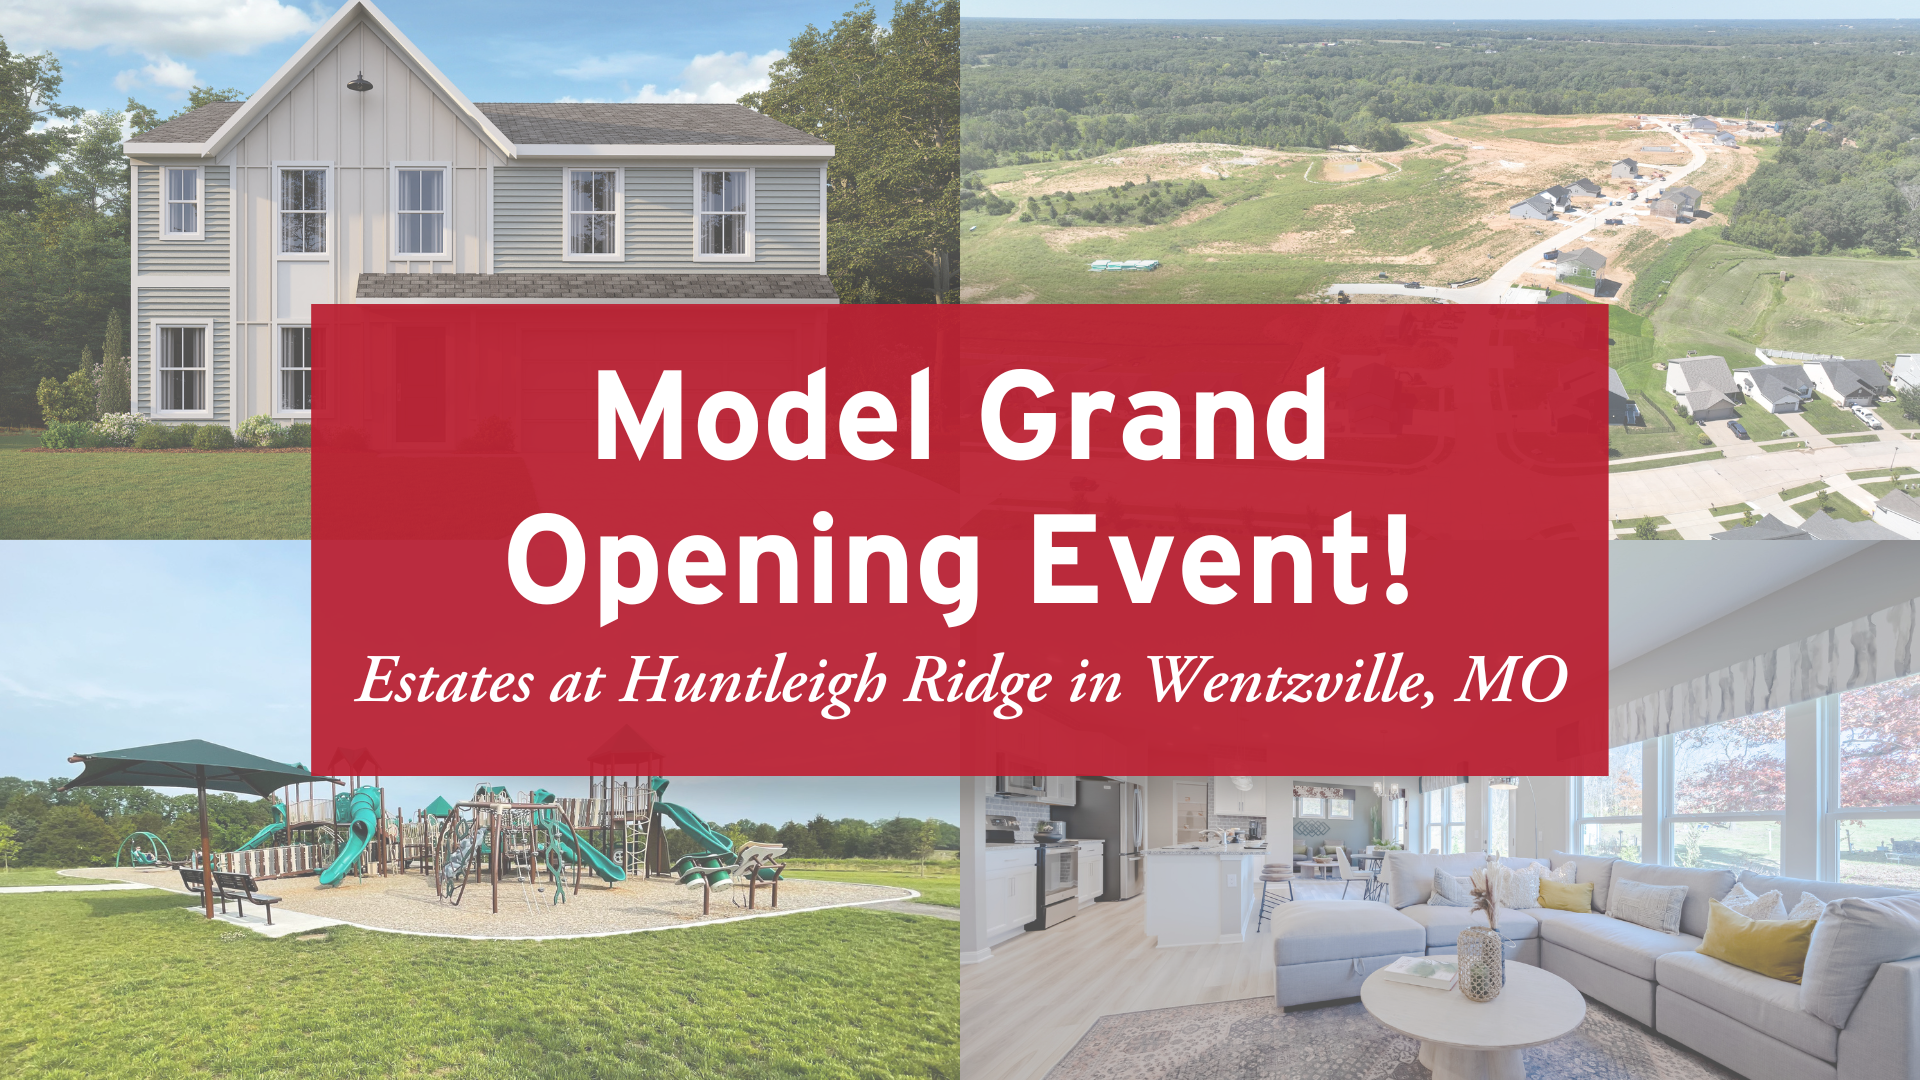 Model Grand Opening Event in Wentzville, MO!